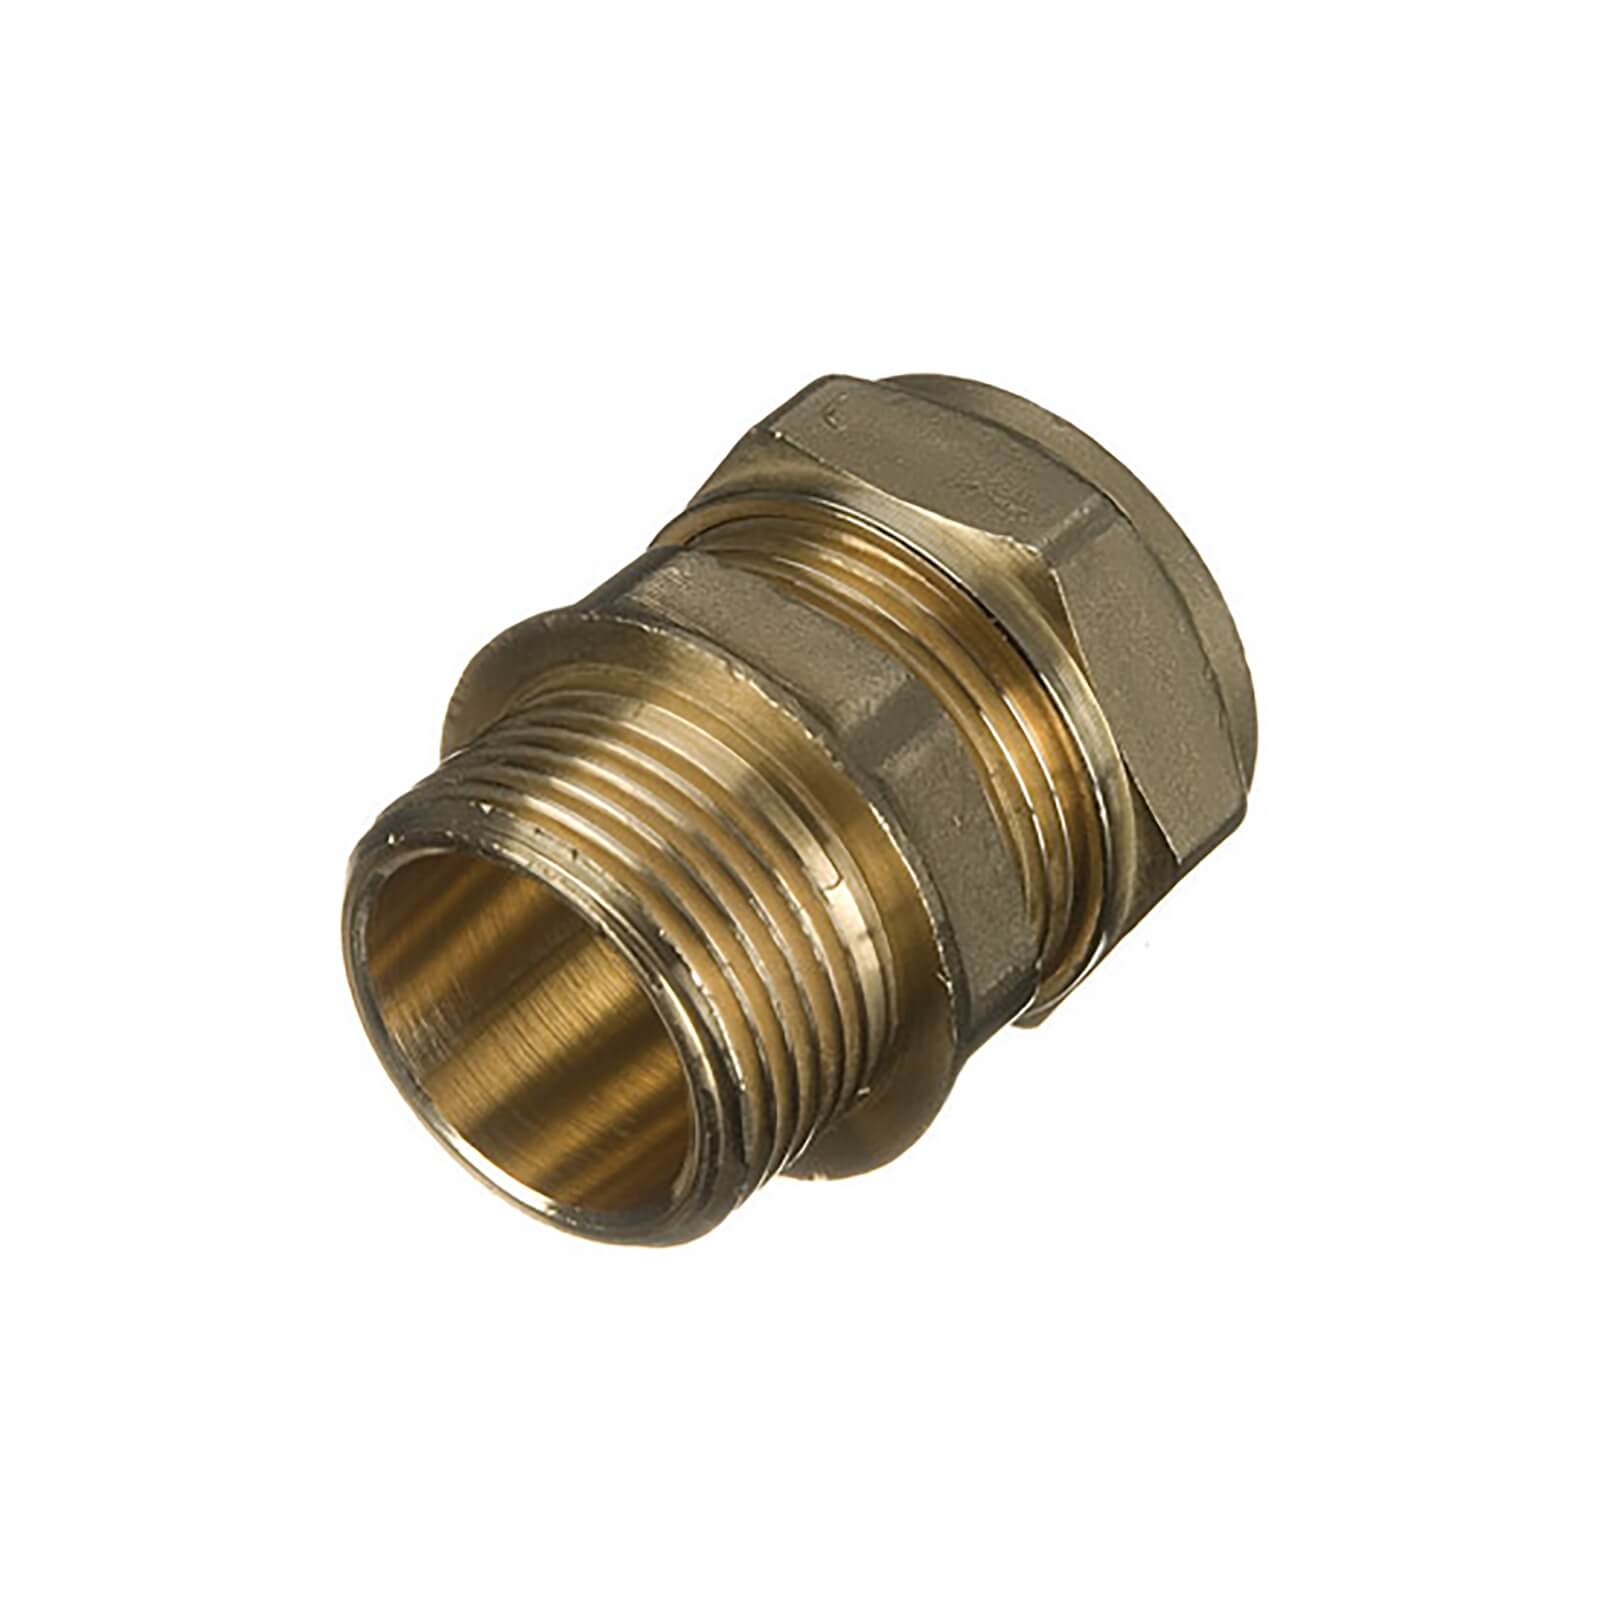 Compression Male Coupler 15mm x 0.75in